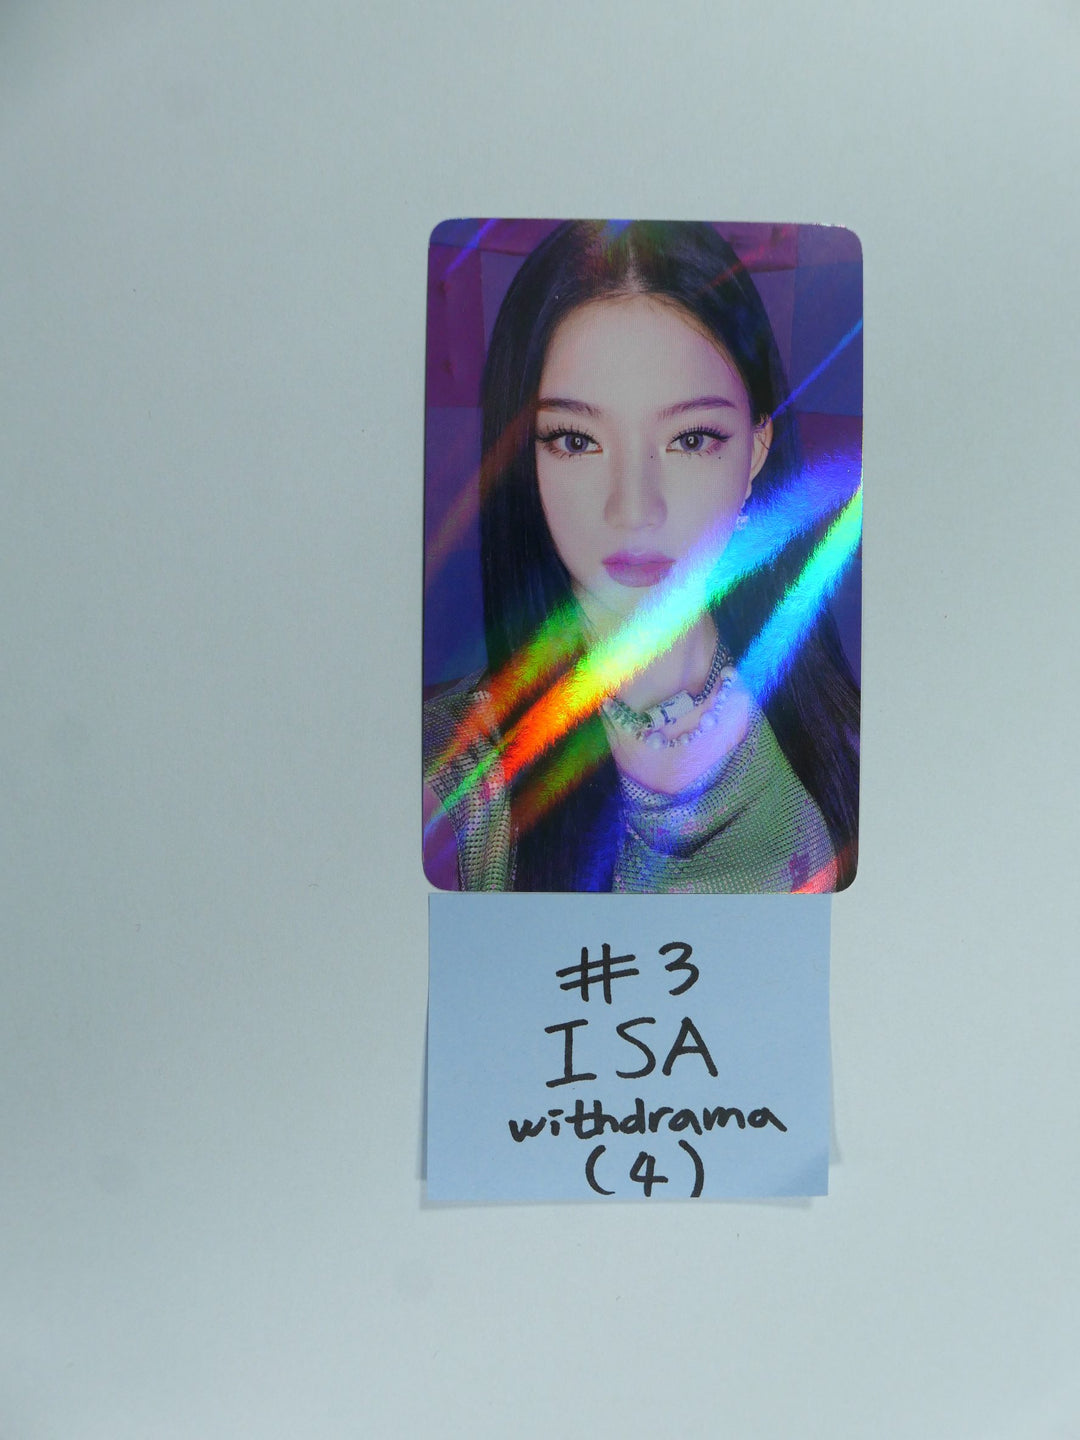 StayC 'YOUNG-LUV.COM' - Withdrama Pre-Order Benefit Hologram Photocard